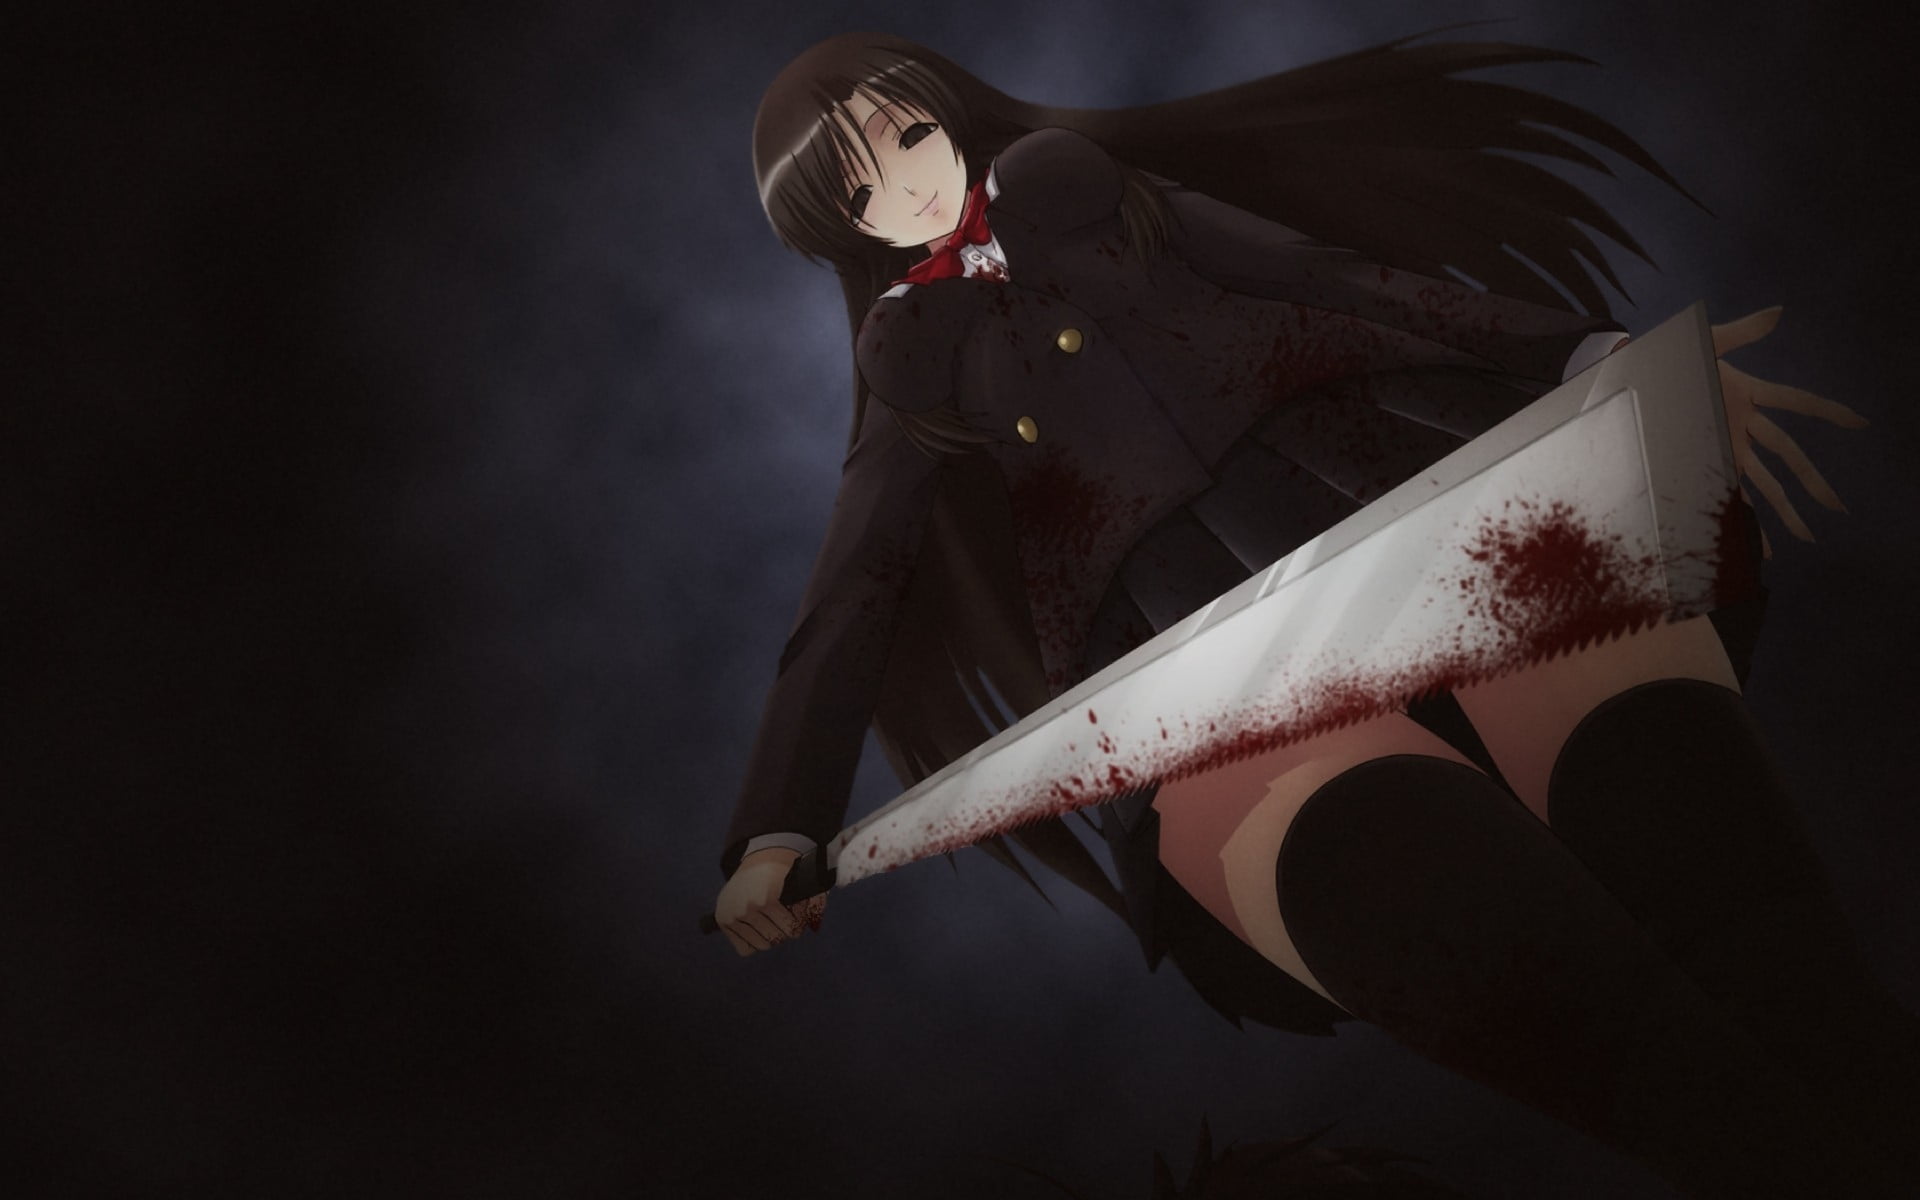 Female Anime Character Wearing Black School Uniform Holding Sword Poster Hd Wallpaper Wallpaper Flare Unlike other stats, you do not need to train at certain areas, the swords themselves are training areas. female anime character wearing black